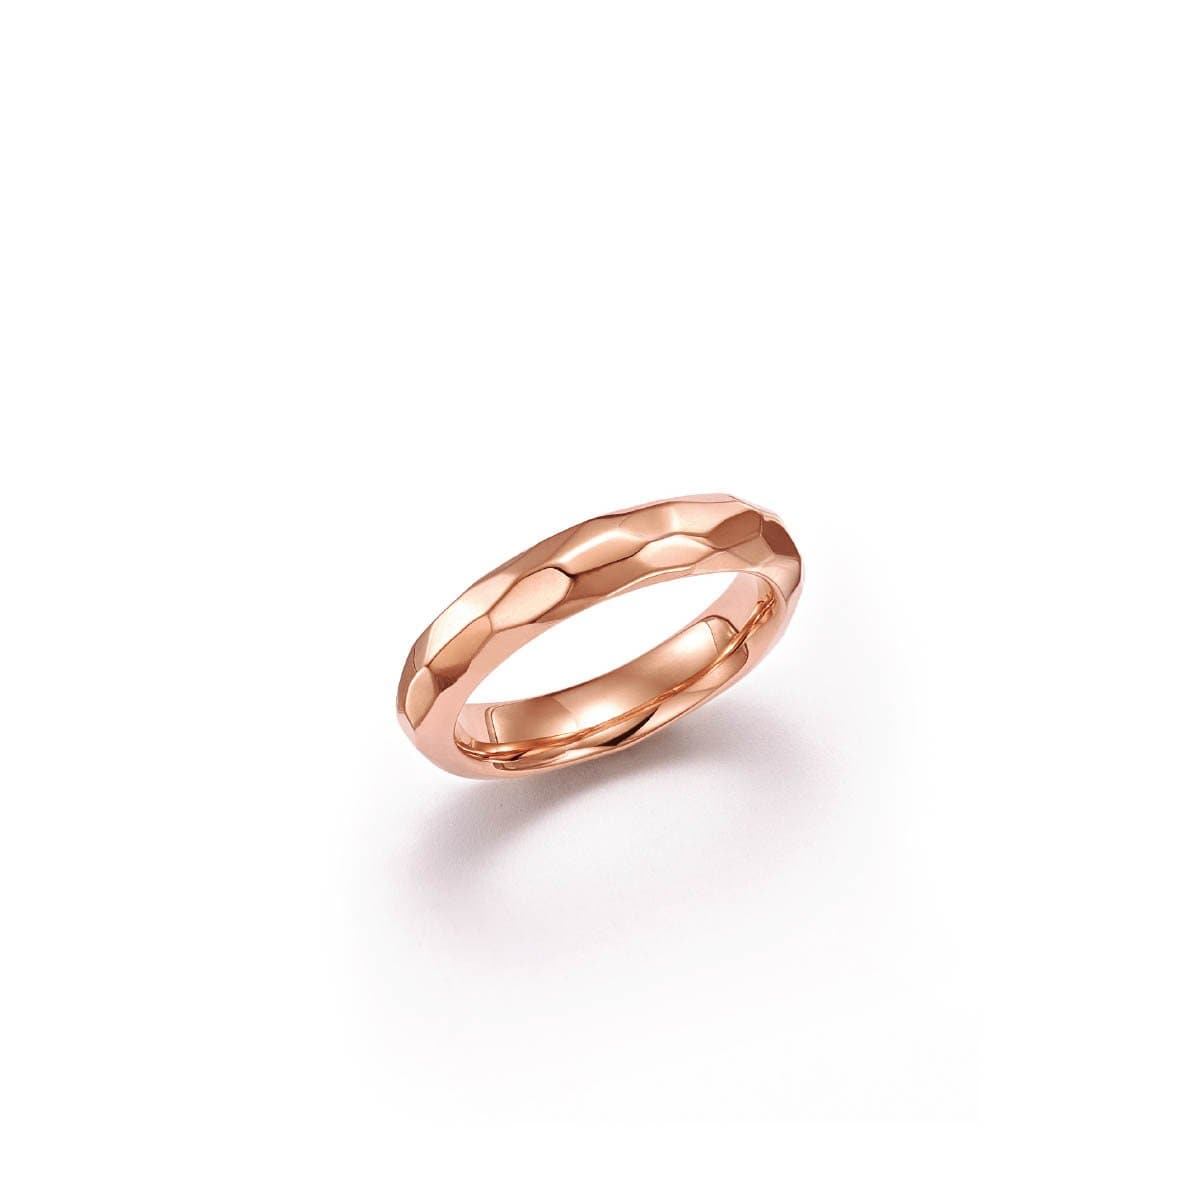 Enchantment Hammered 18kt Certified Fairmined Ecological Rose Gold Wedding Ring/Band - Full View